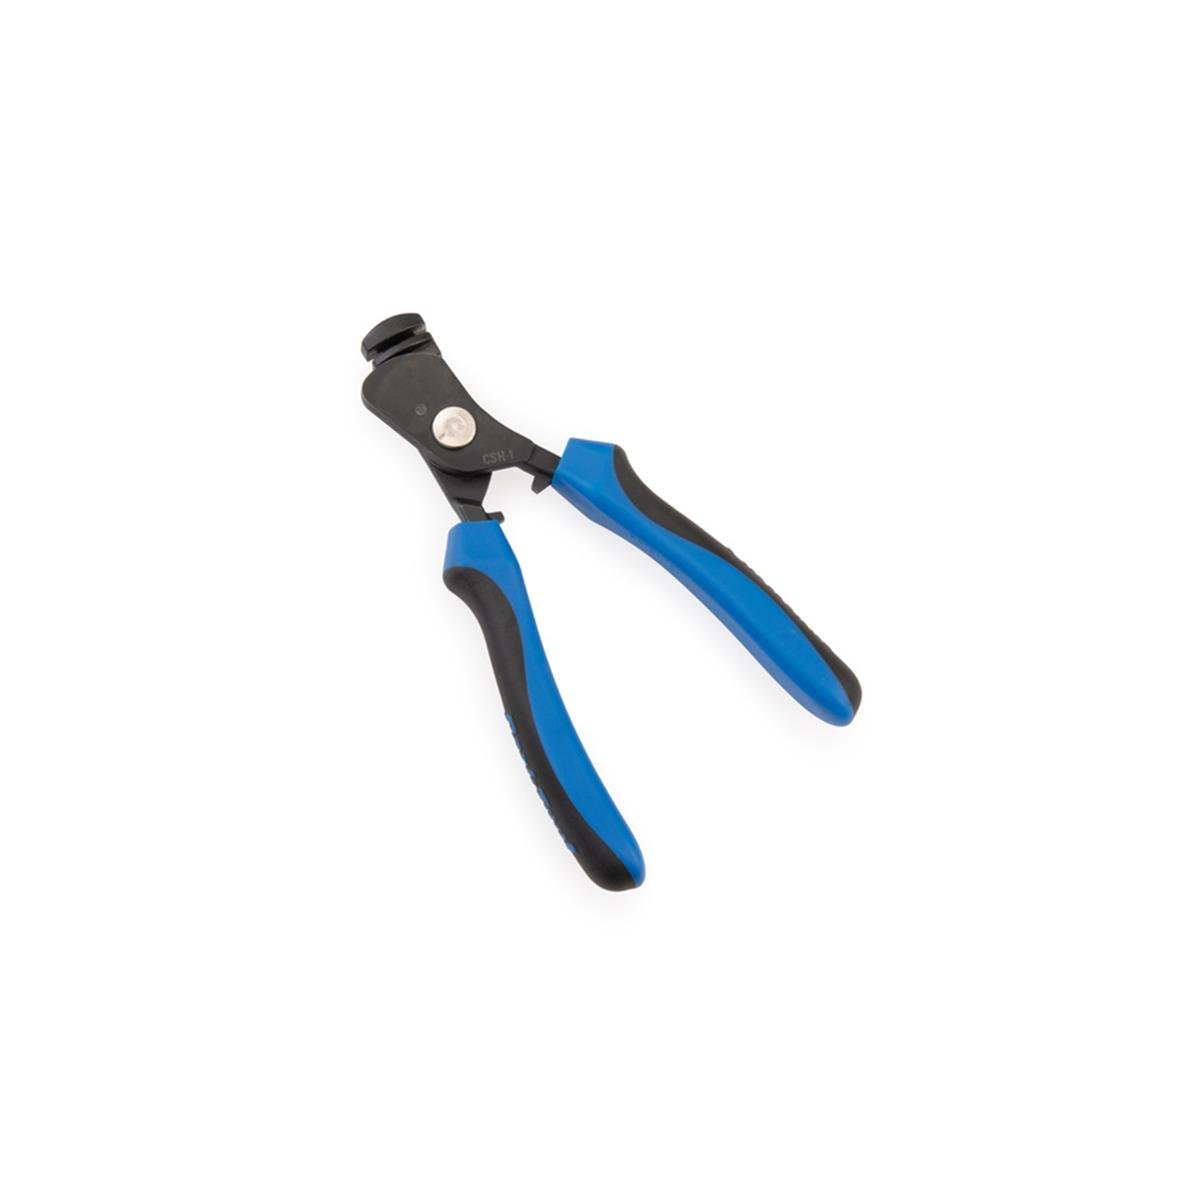 Park Tool Spoke Clamp Pliers CSH-1 Rubber coated handle